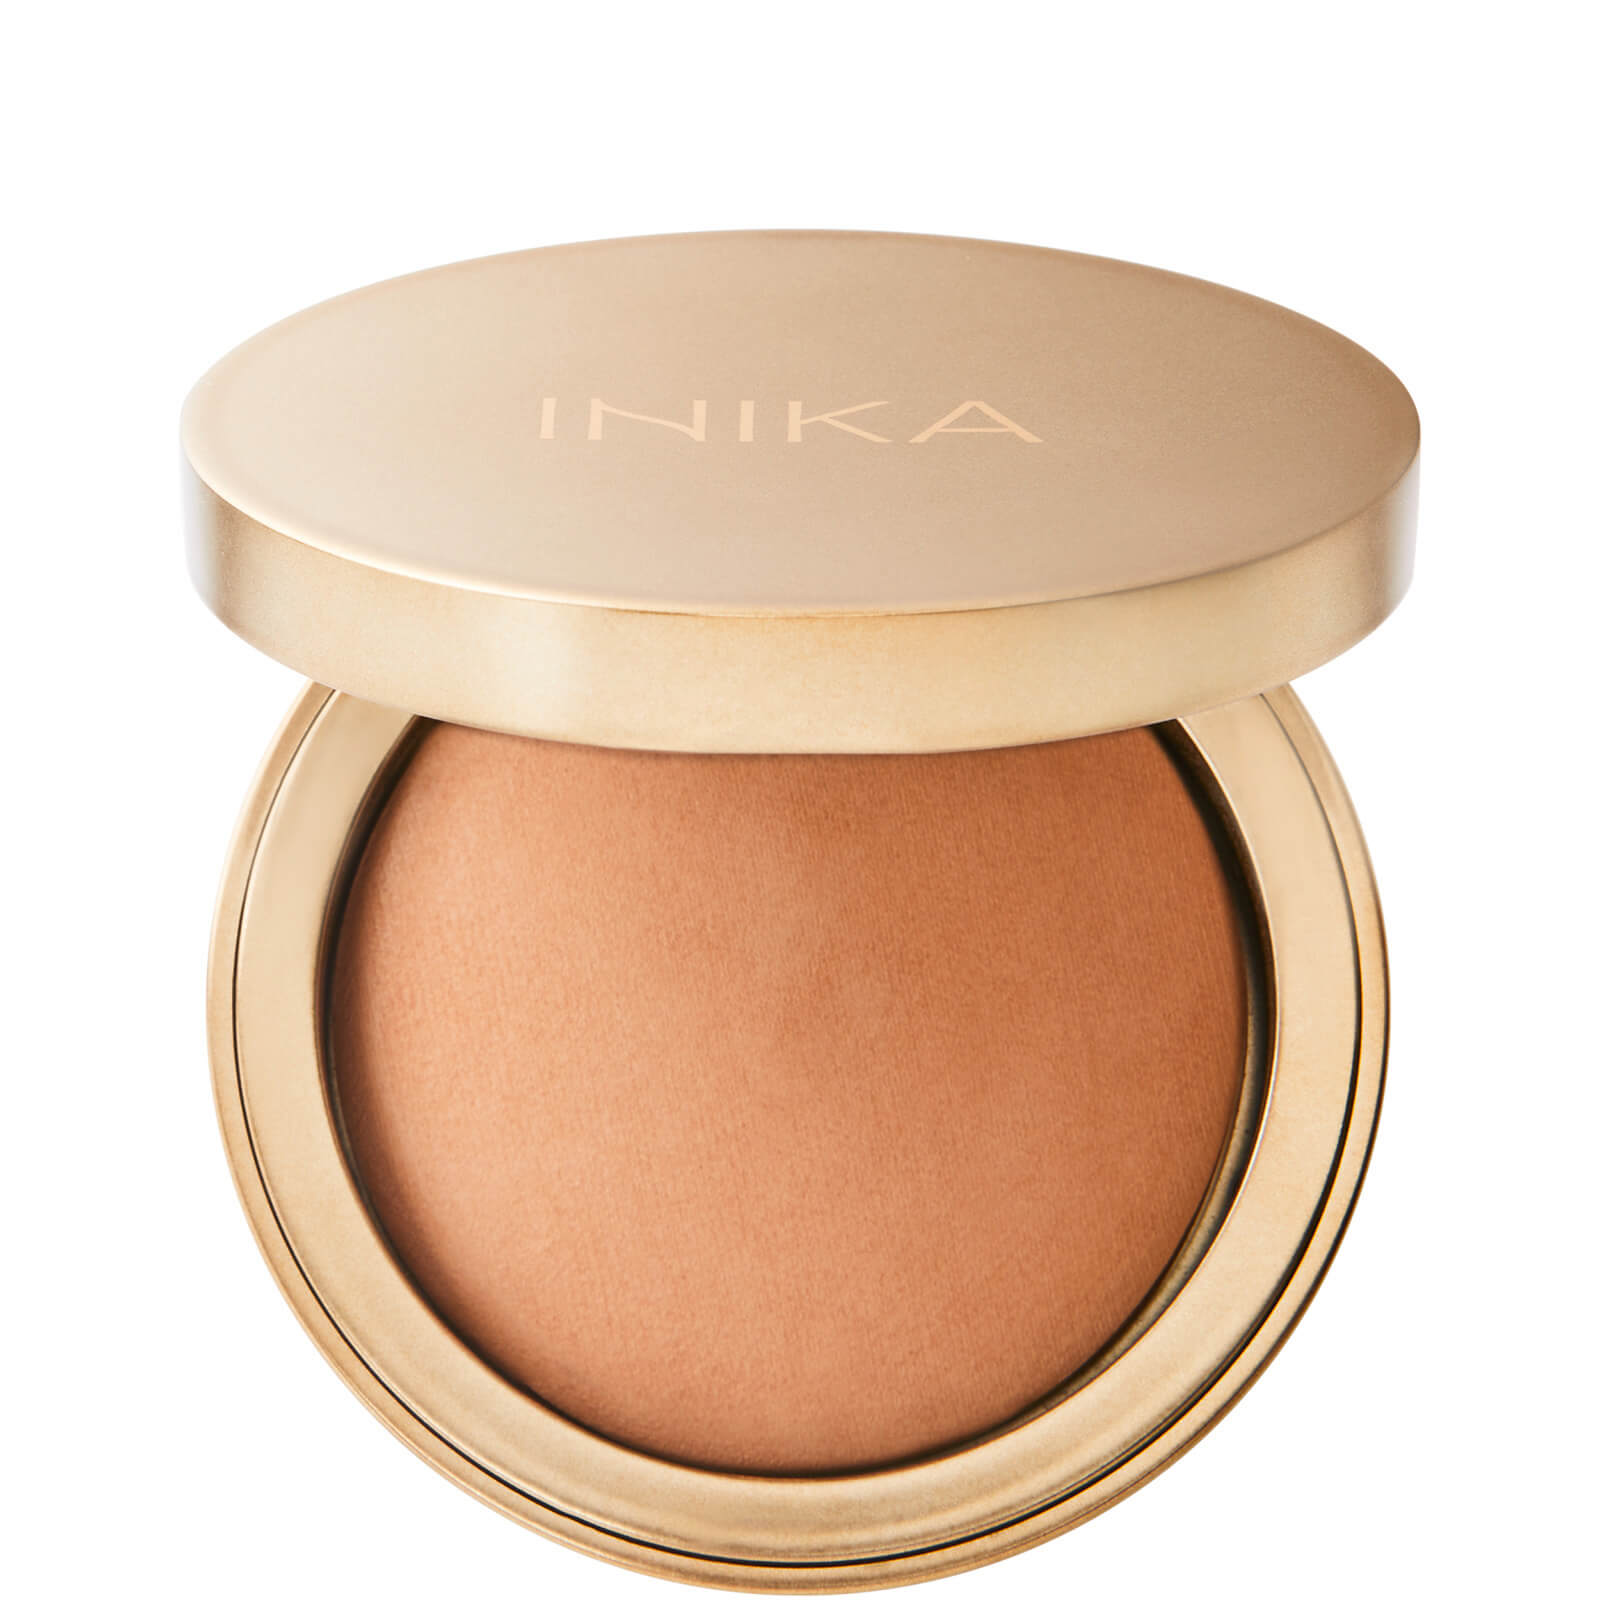 INIKA Baked Bronzer 8g (Various Shades) - Sunkissed